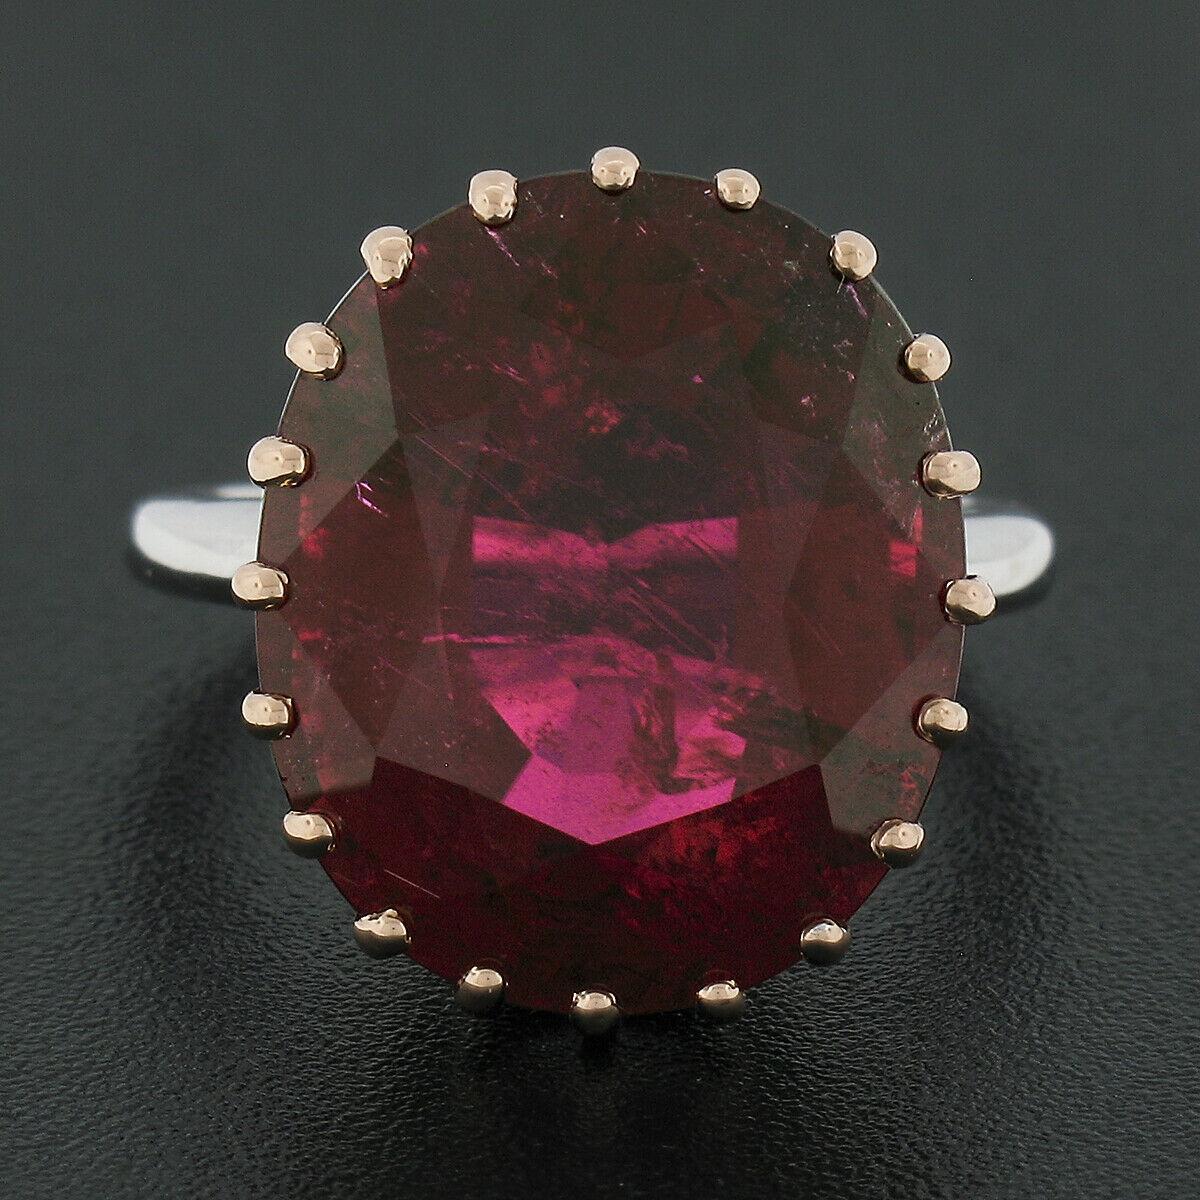 Here we have a truly magnificent, custom made, brand new cocktail ring crafted in solid 18k white and rose gold and features a large and breathtaking rubellite solitaire, multi prong set atop of the fancy rose gold basket. The gorgeous tourmaline